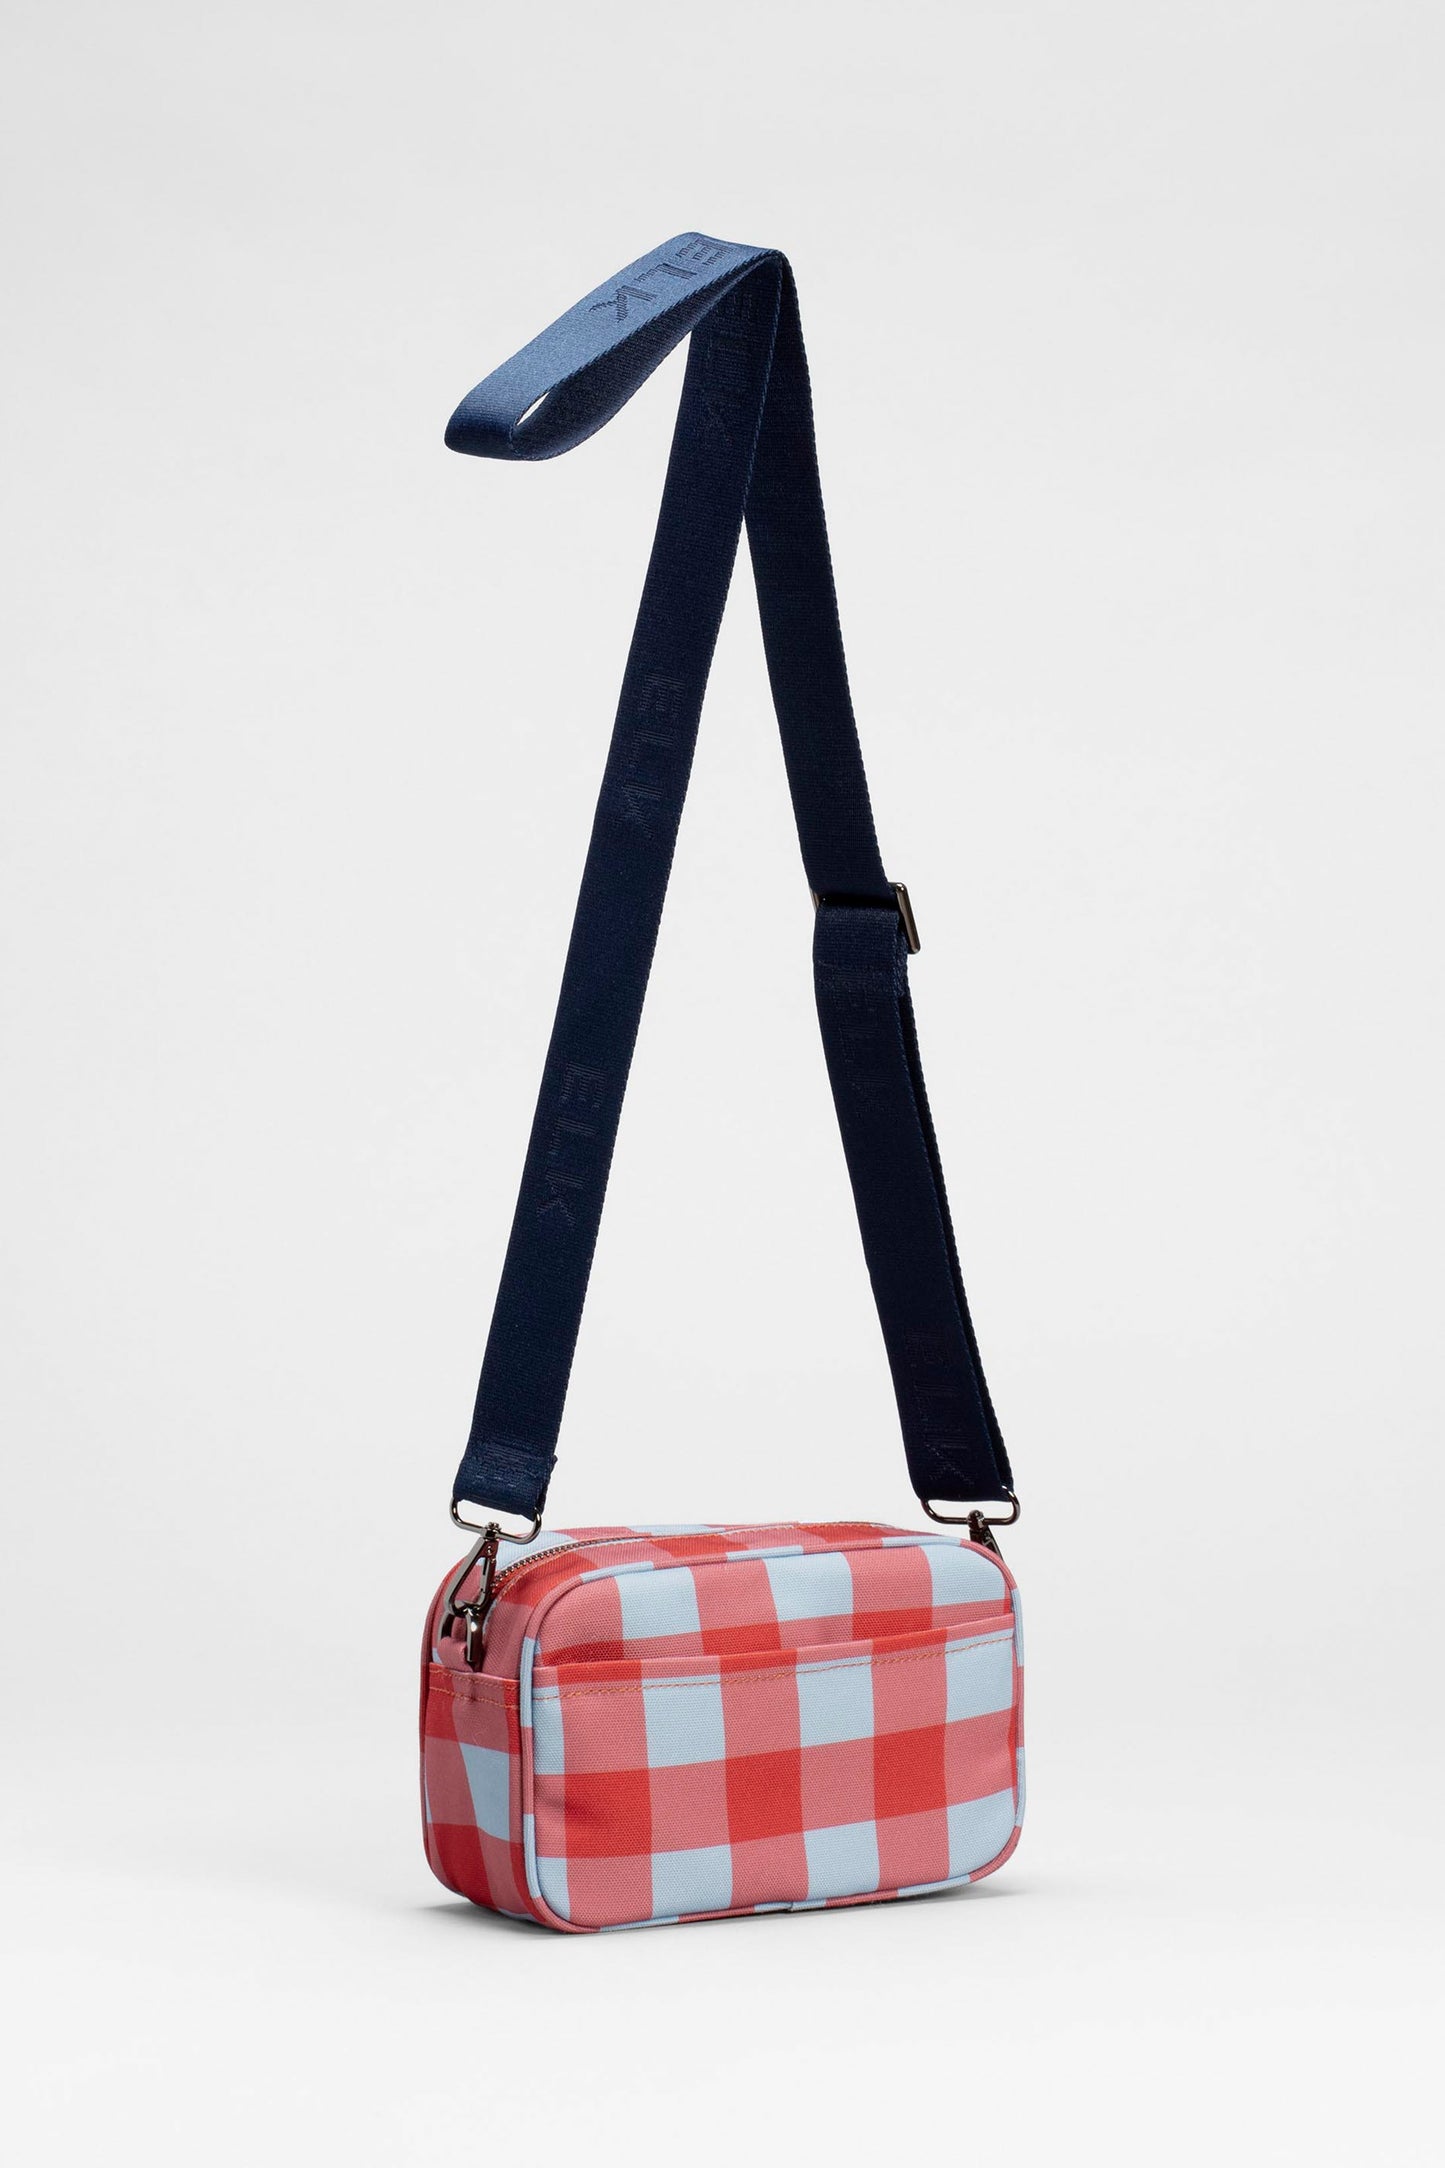 Kassel Recycled Fabric Gingham Print Zip Up Cross Body Bag Back | RED POWDER BLUE GINGHAM